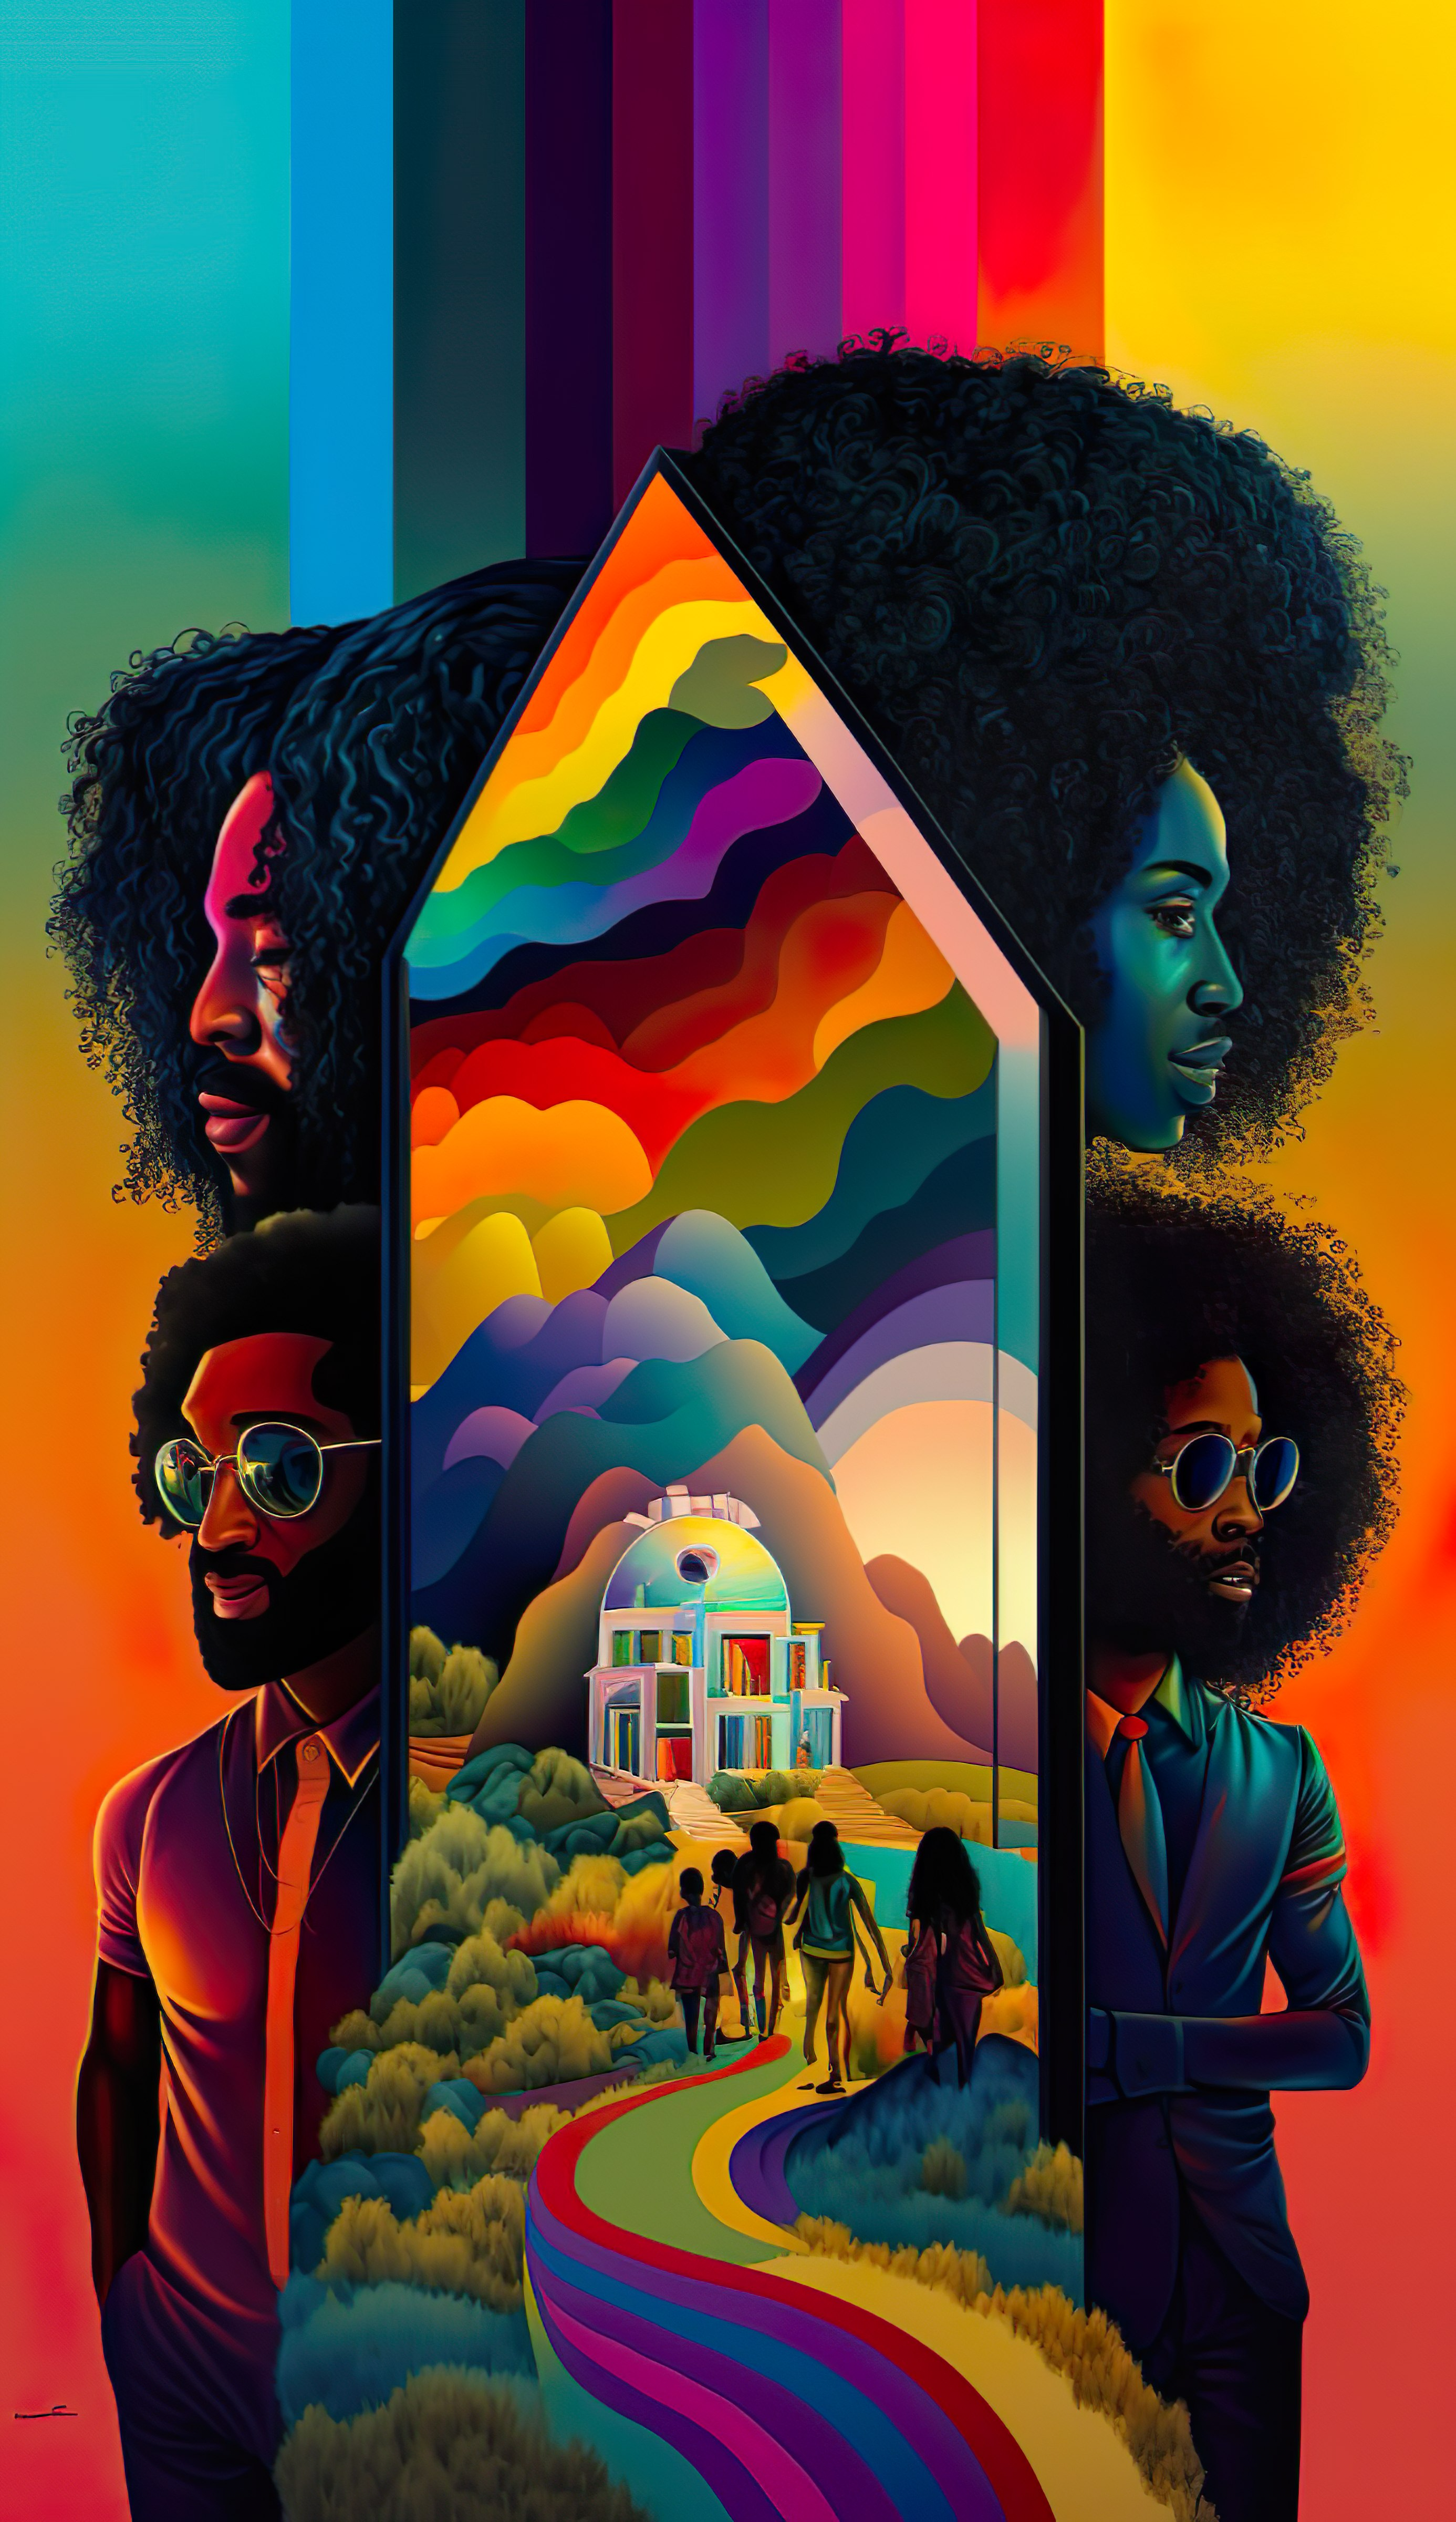 Four Black people looking from behind a scene of four people walking toward a curved top building down a rainbow pathway